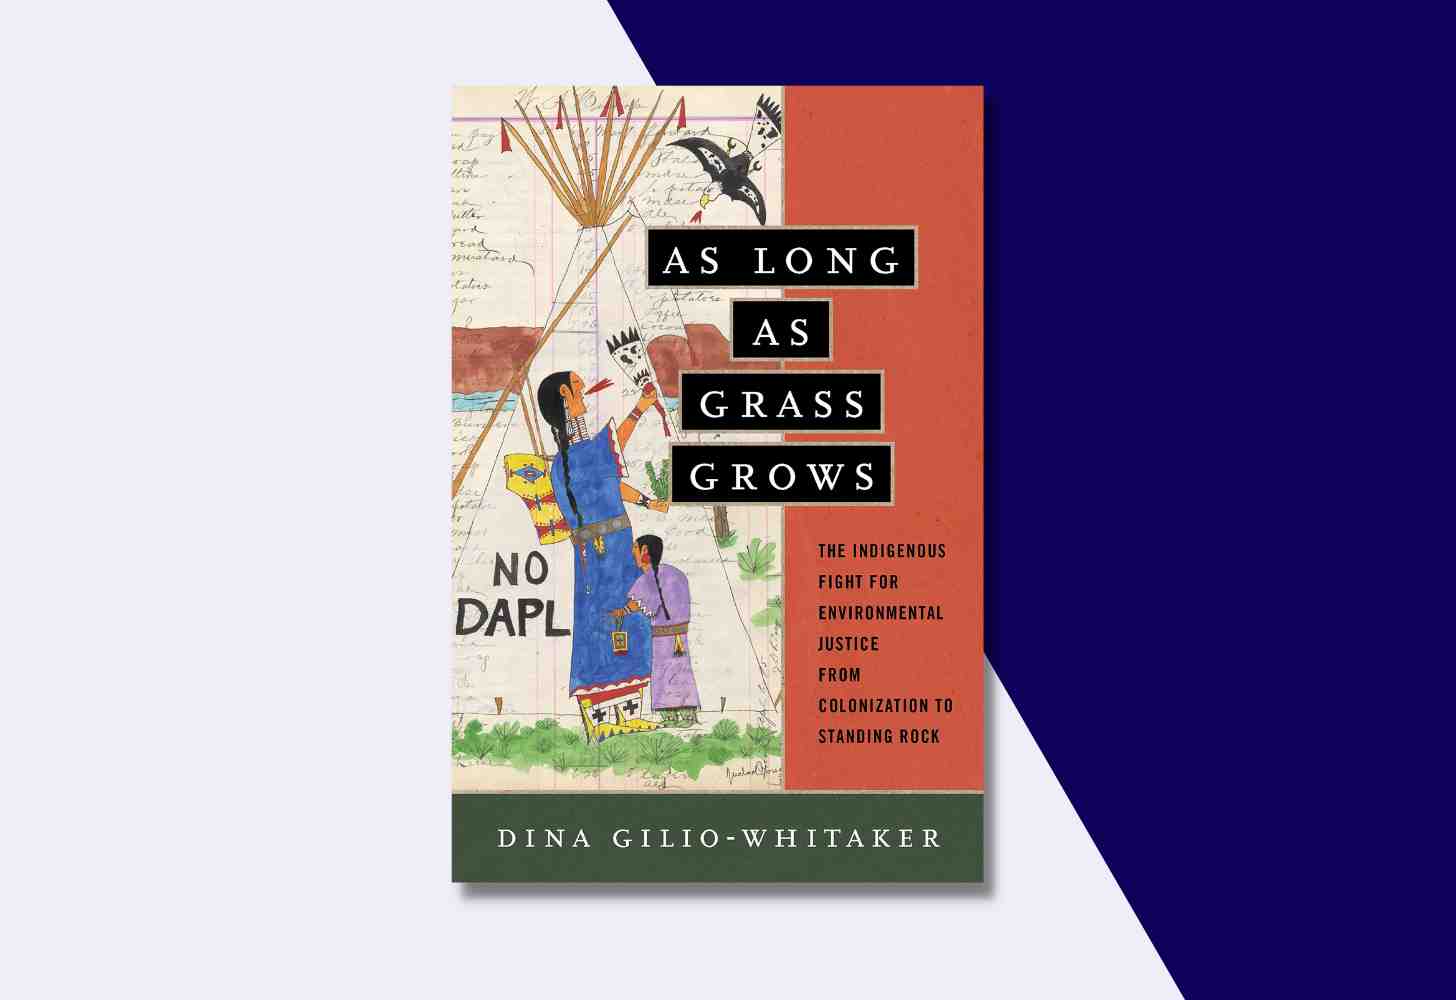 The Cover Of: “As Long as Grass Grows: The Indigenous Fight for Environmental Justice, from Colonization to Standing Rock” by Dina Gilio-Whitaker